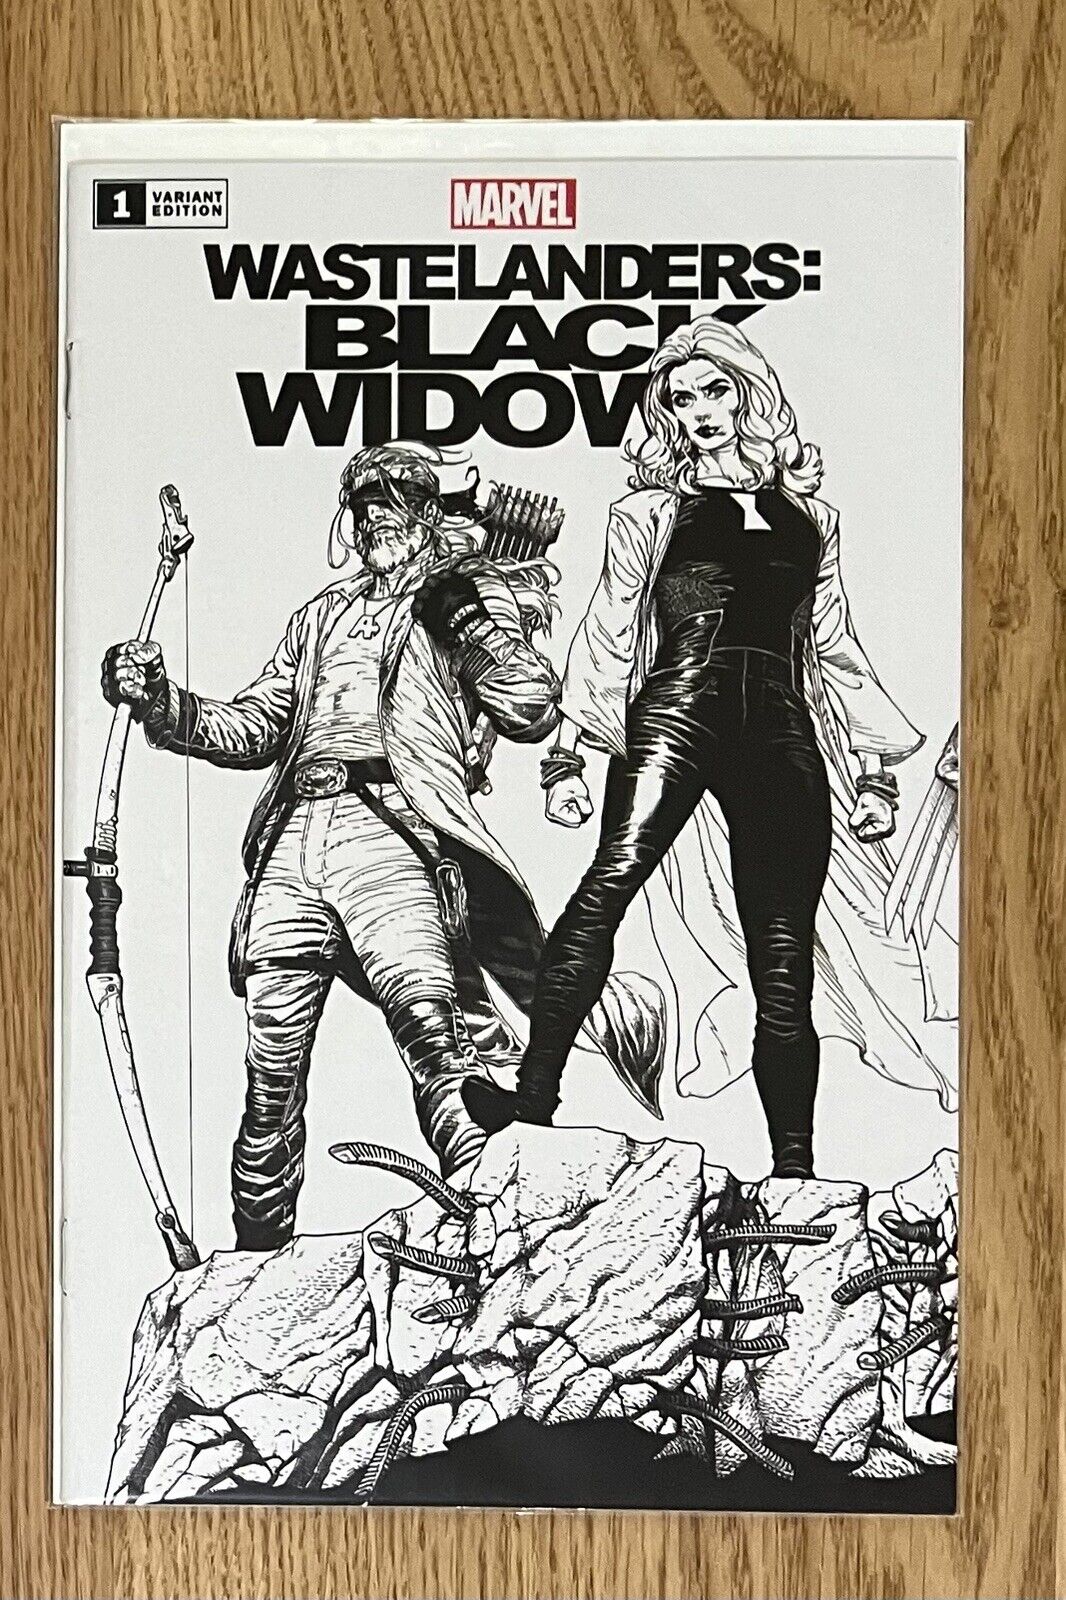 Wastelanders: Black Widow #1 Black and White Connecting Comic Book Cover